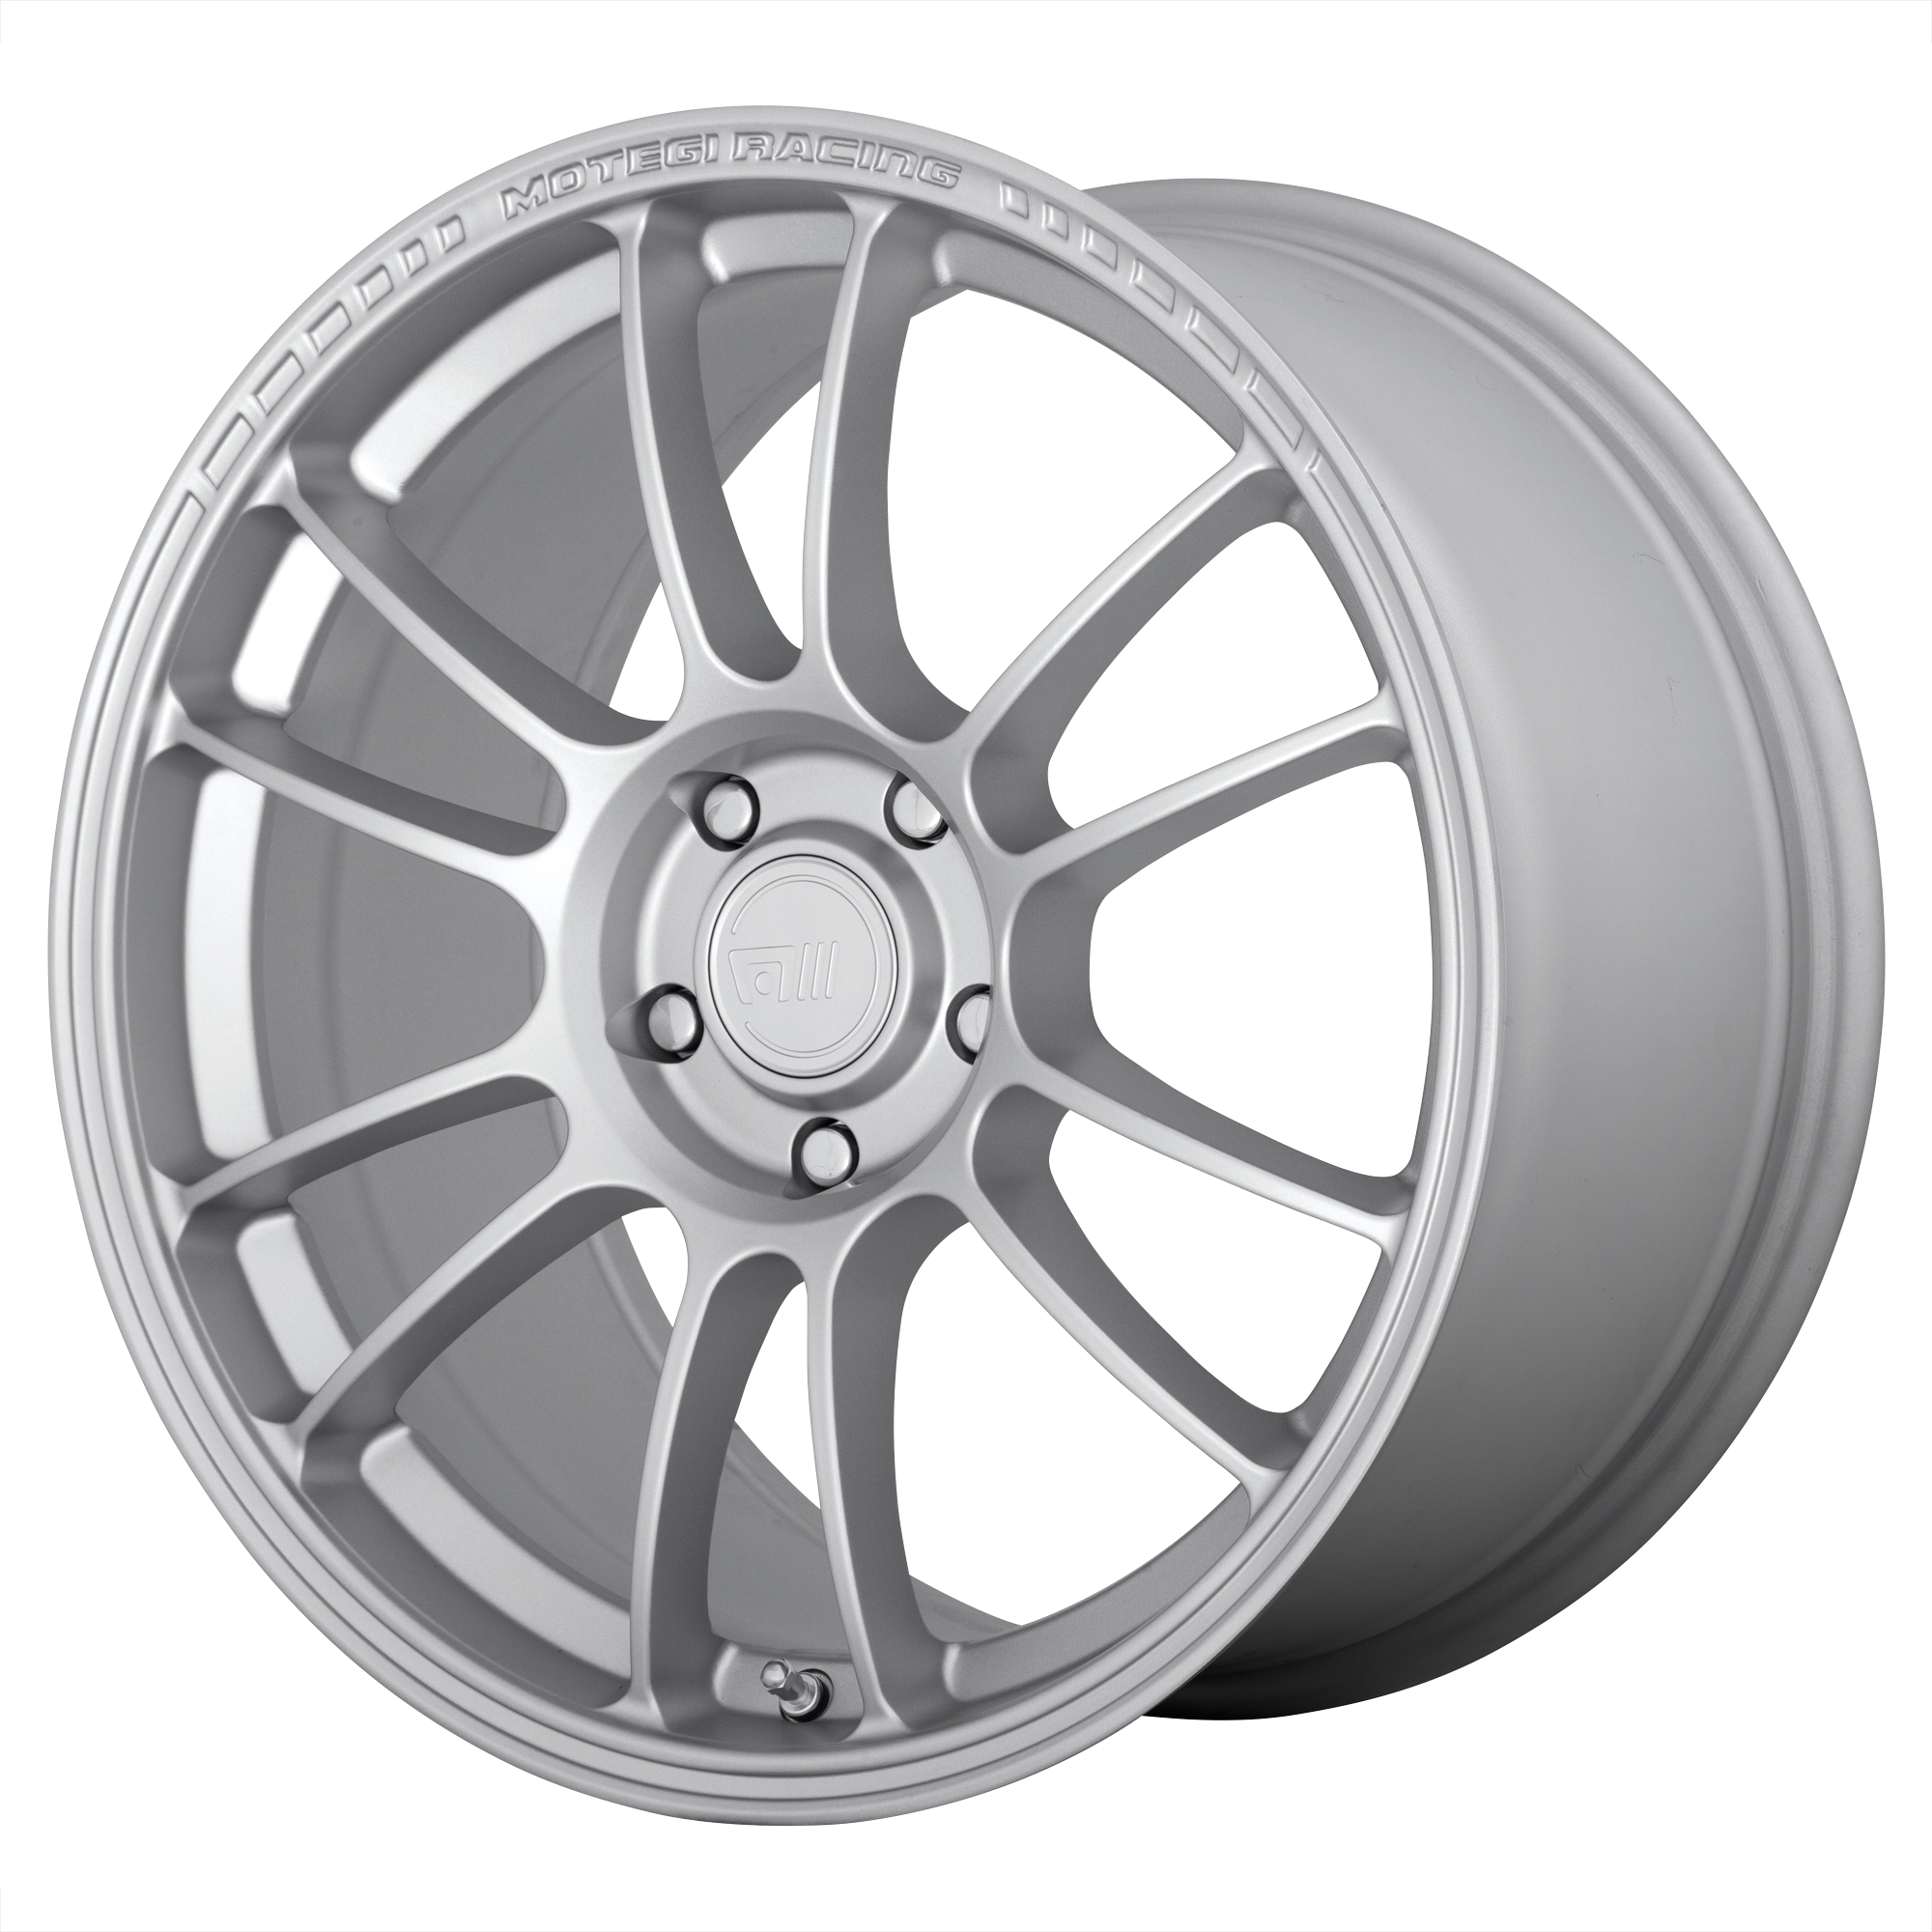 SS6 18x8.5 5x114.30 HYPER SILVER (42 mm) - Tires and Engine Performance